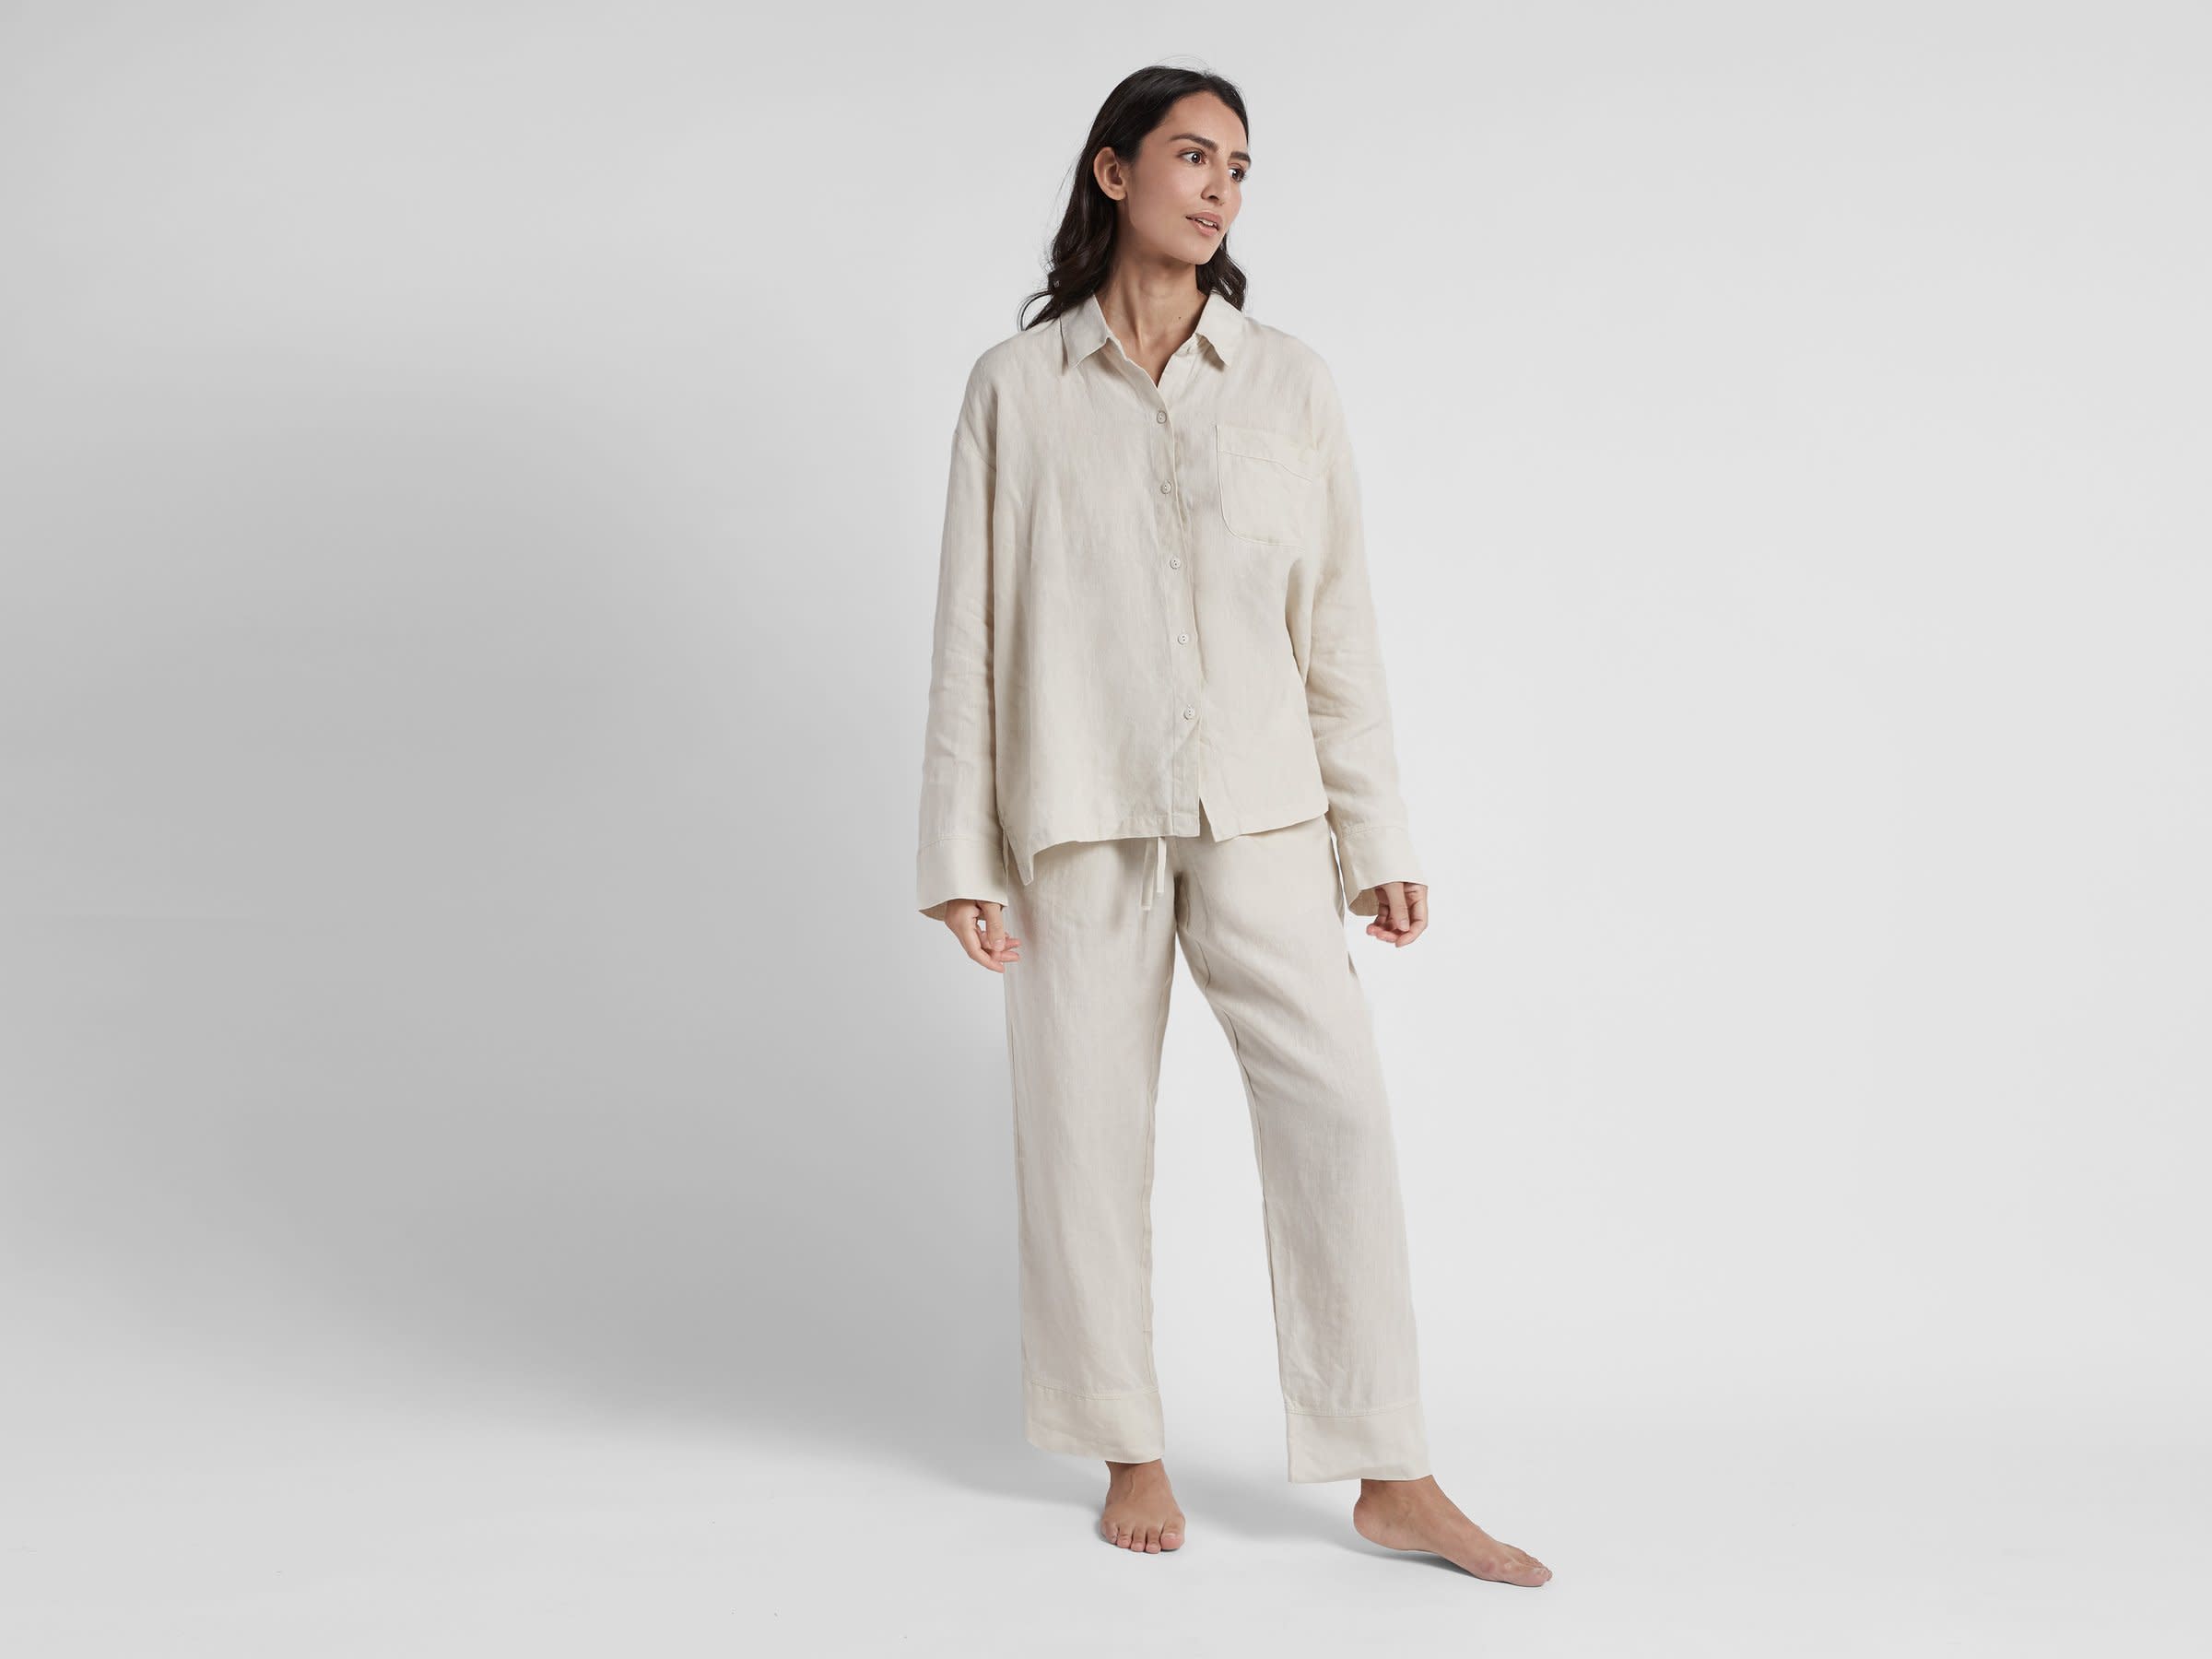 Bone Womens Linen Pant Shown In A Room